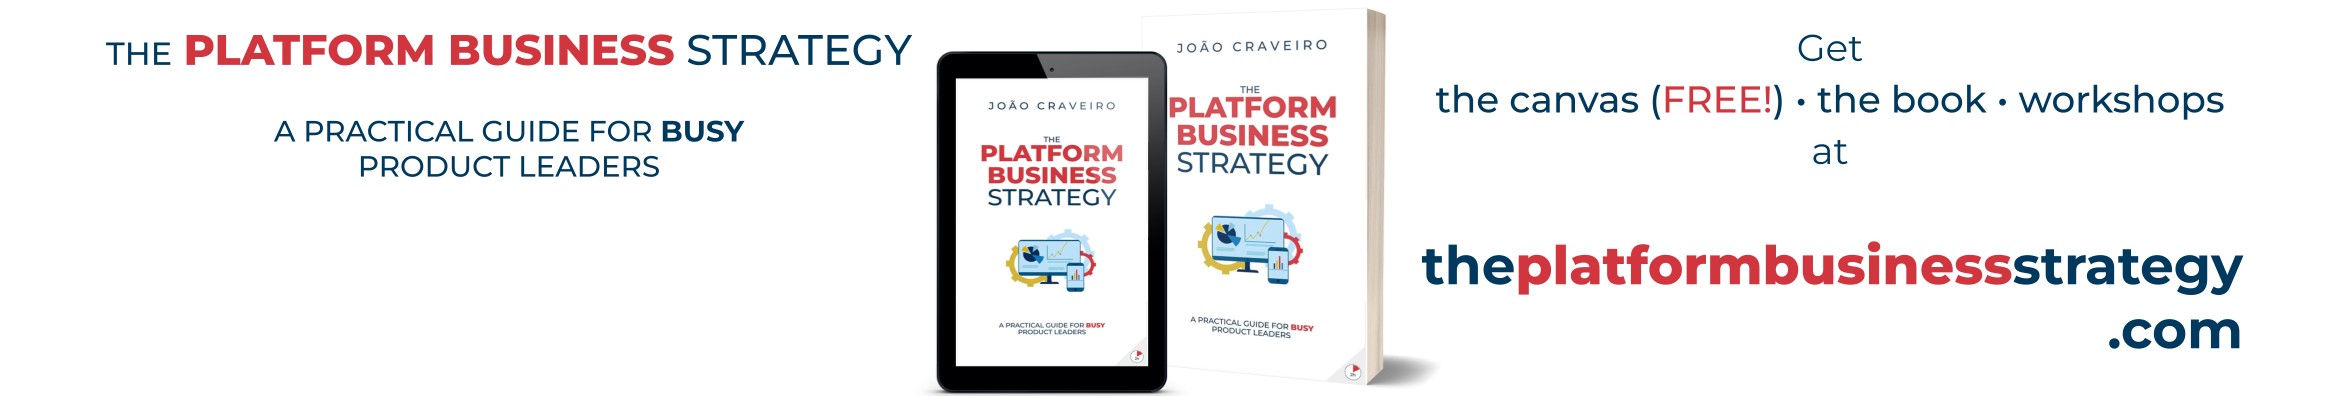 The Platform Business Strategy: a Practical Guide for Busy Product Leaders. Get the canvas (FREE!), the book, the workshops at theplatformbusinessstrategy.com